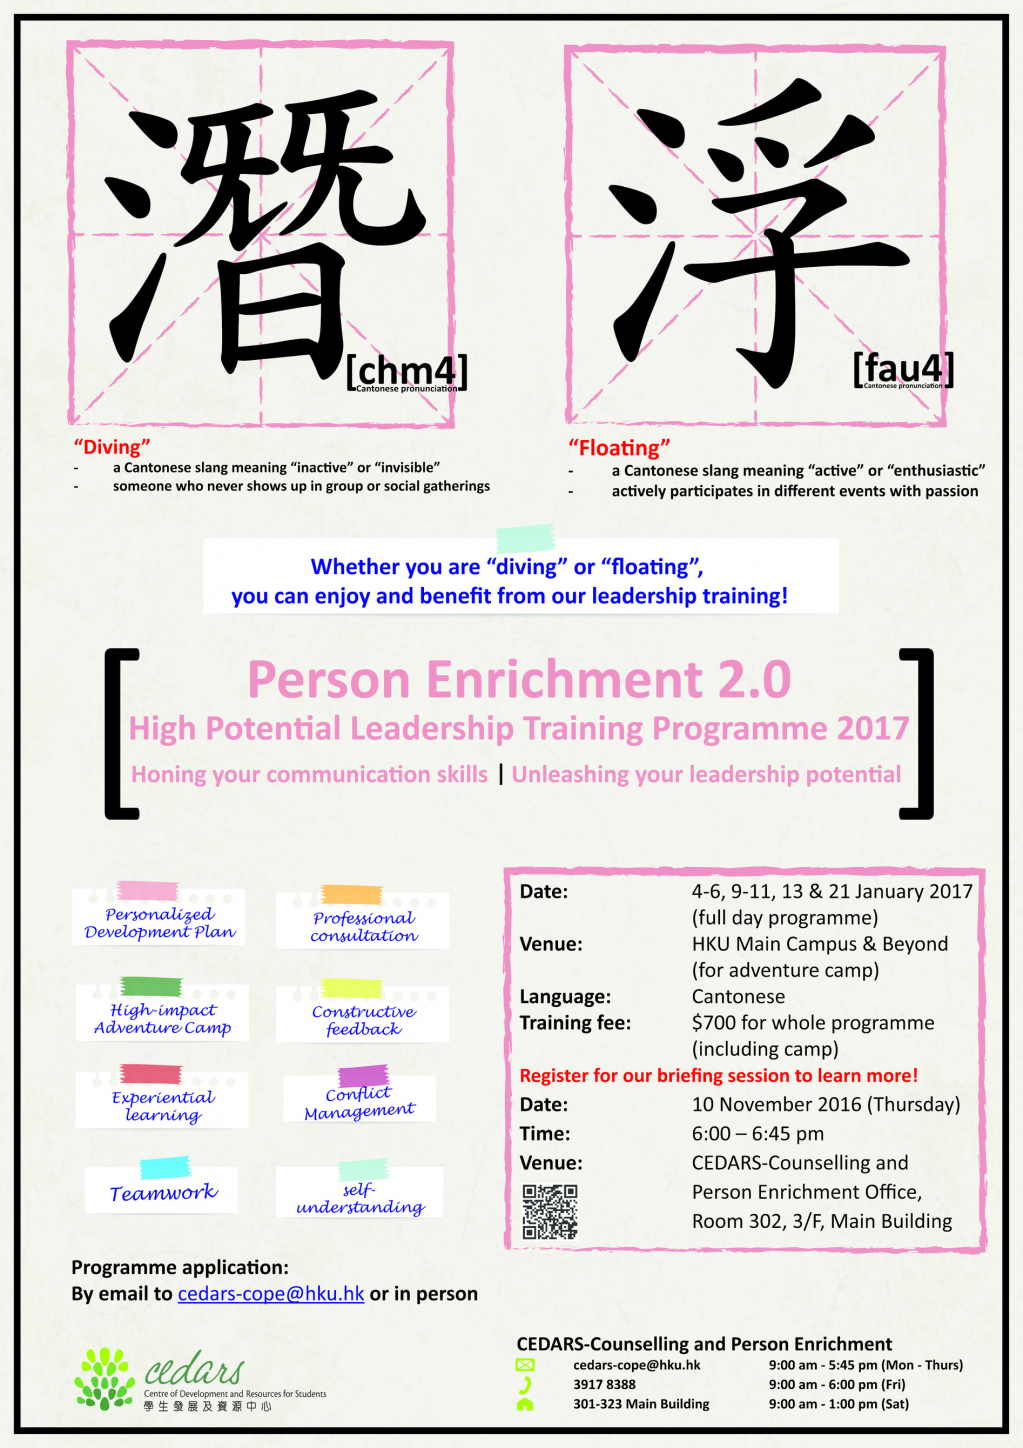 Person Enrichment 2.0 － High Potential Leadership Training Programme